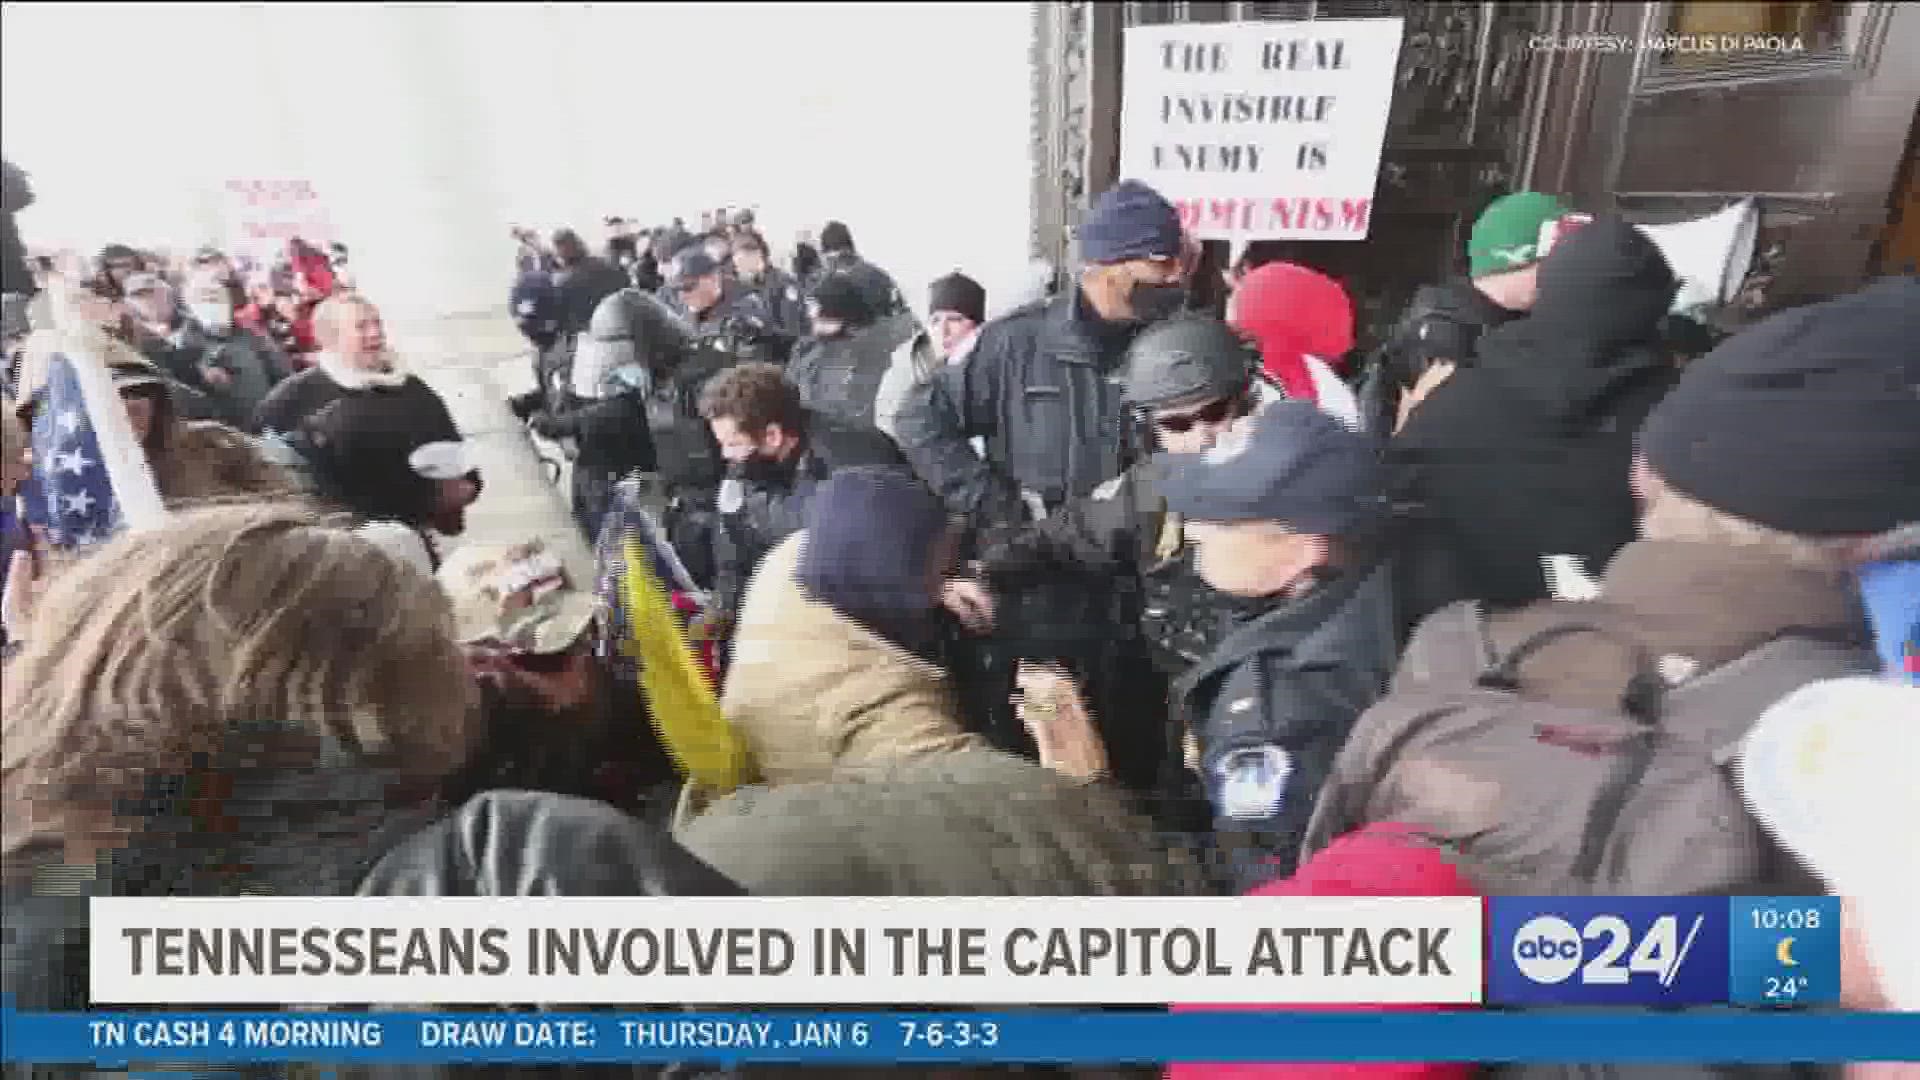 At least 22 people with Tennessee connections were arrested for storming the Capitol. Most were from Middle Tennessee.